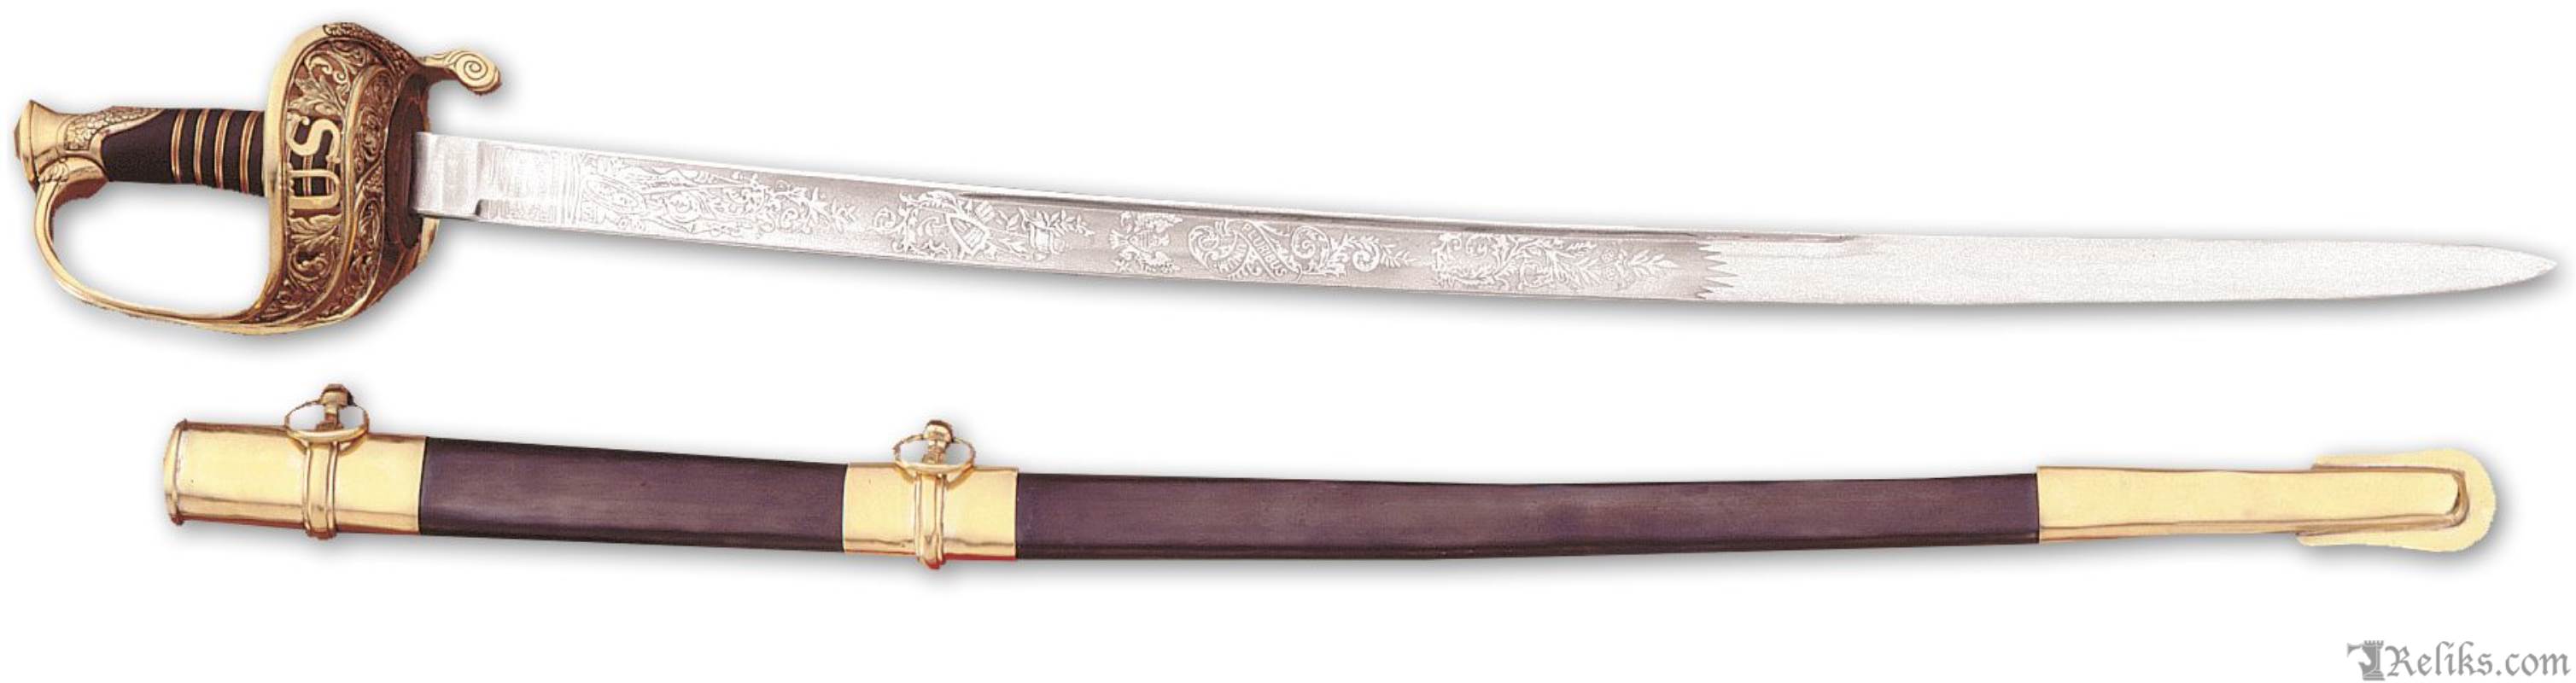 Union Staff and Officers Sword